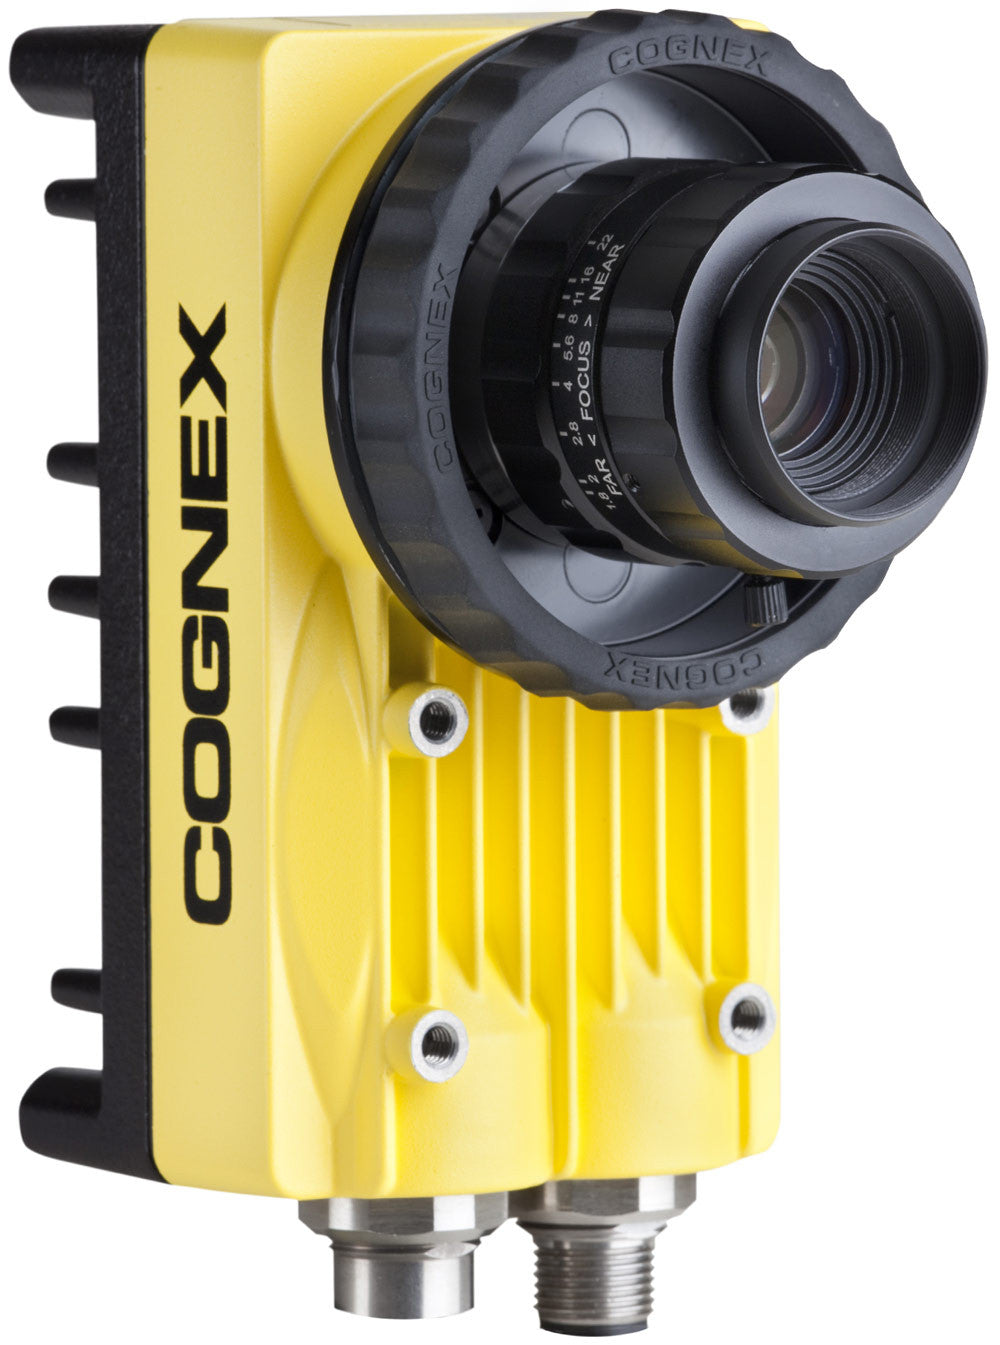 Photo of Cognex IS5603-11 In-Sight With PatMax Machine Vision Camera 5603-11 5603